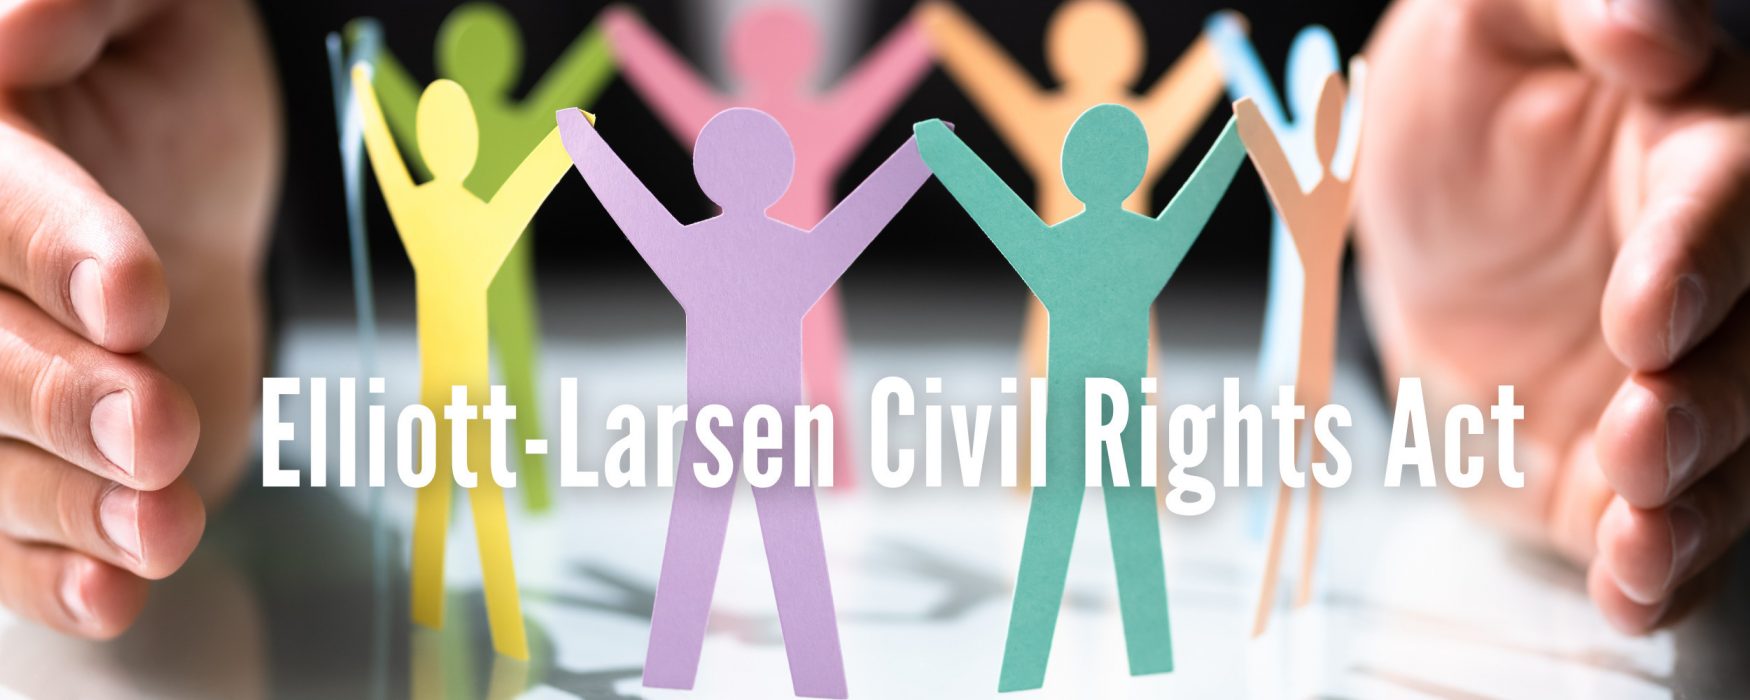 Image with the title "Eliott-Larsen Civil Rights Act"